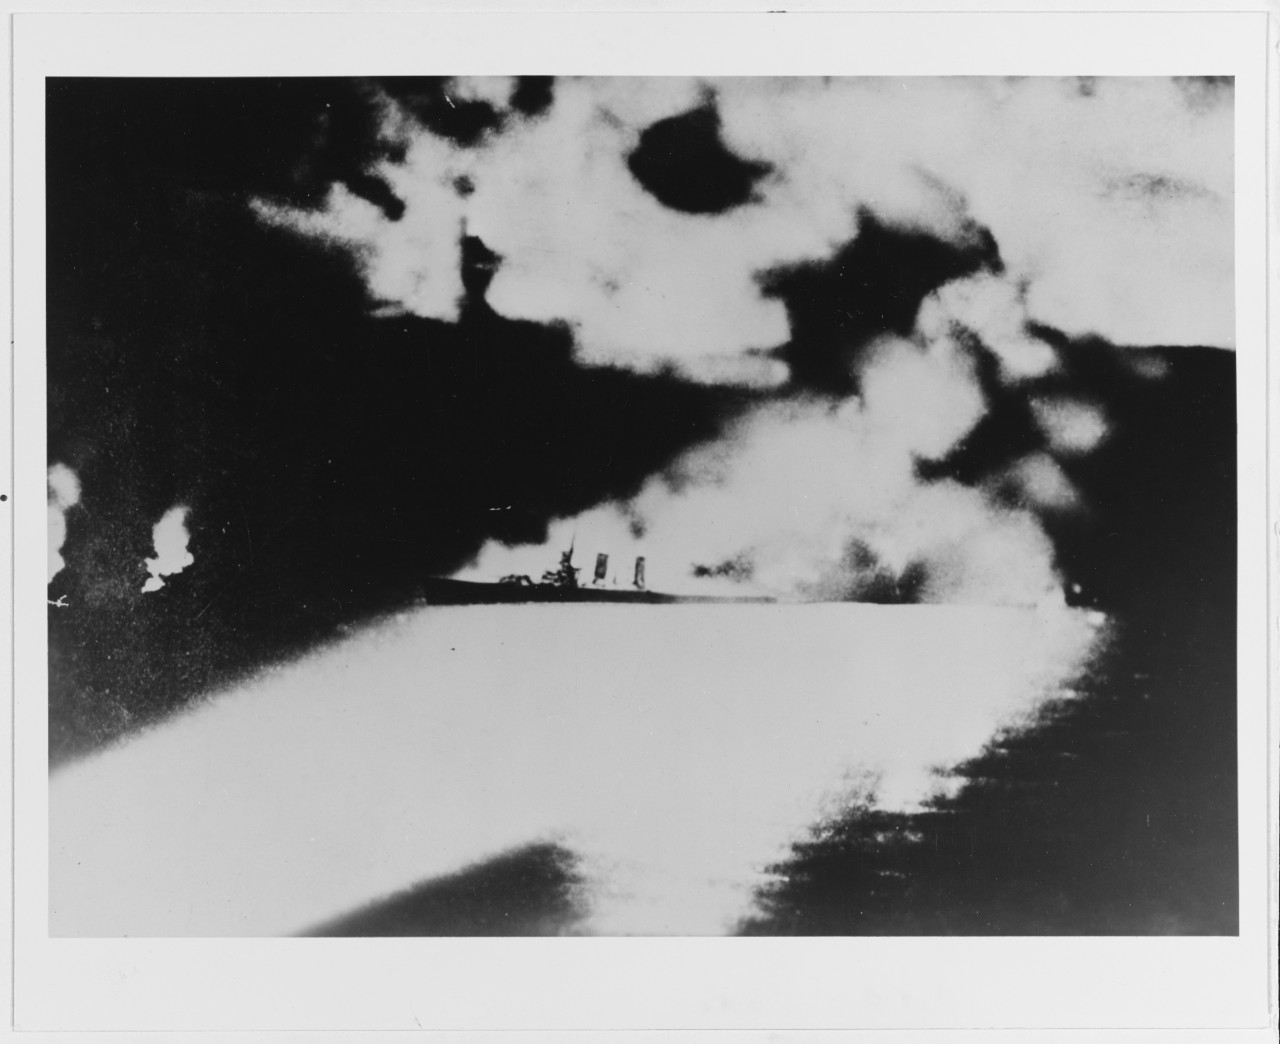 Photographed from a Japanese cruiser during the Battle of Savo Island, off Guadalcanal, 9 August 1942. Quincy, seen here burning and illuminated by Japanese searchlights, was sunk in this action. Copied from the Rear Admiral Samuel Eliot Morison World War II history illustrations file. U.S. Naval History and Heritage Command Photograph.